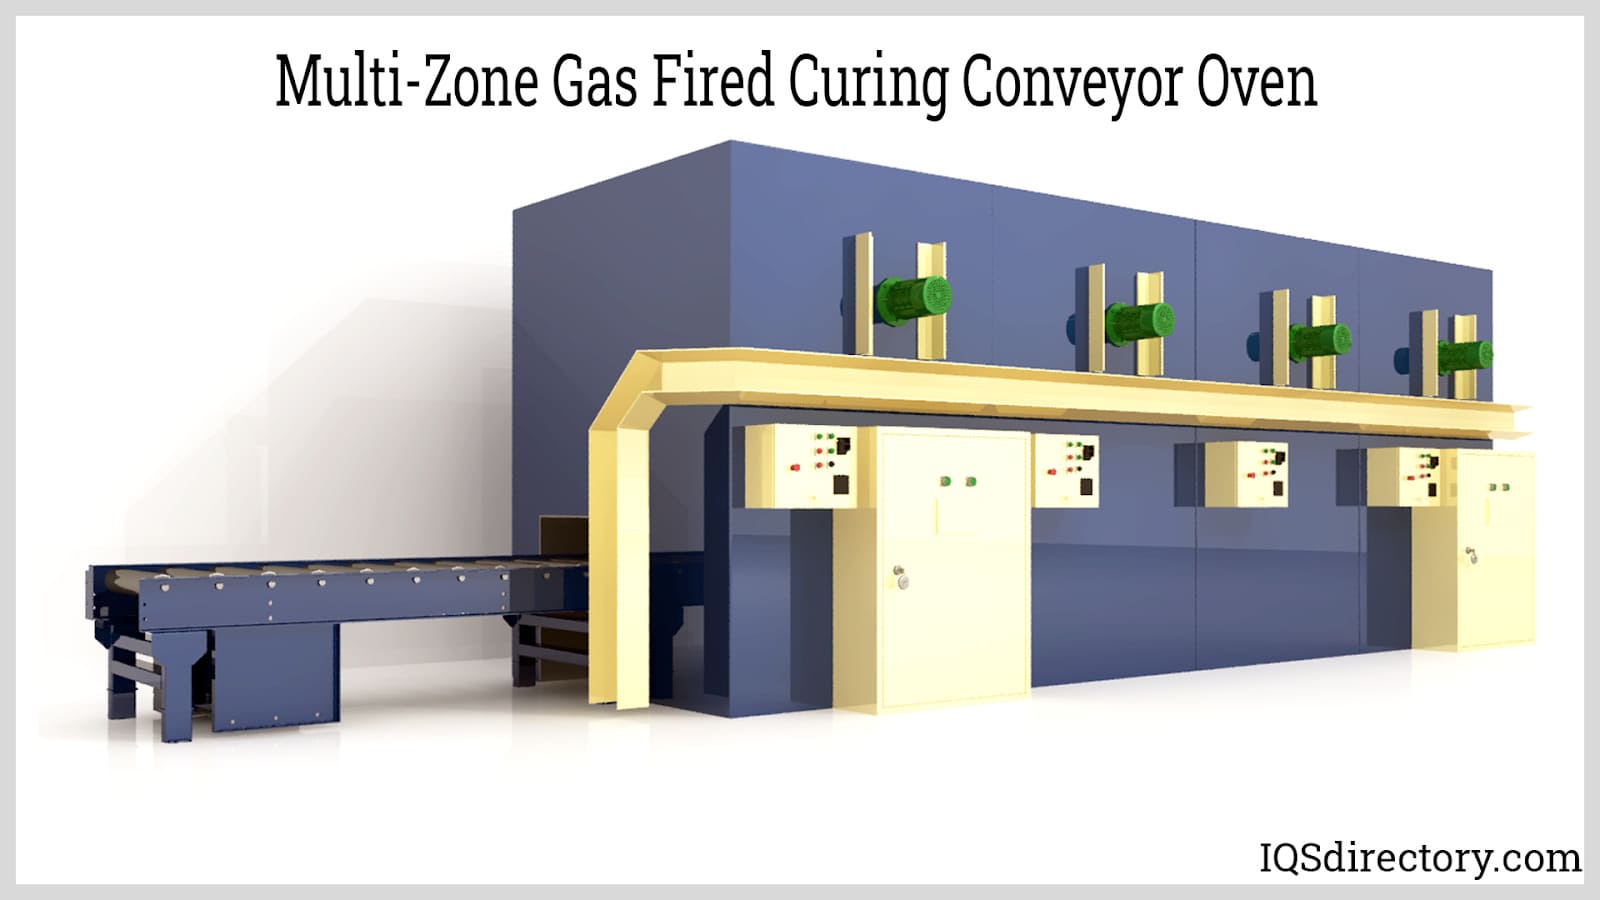 Multi-Zone Gas Fired Curing Conveyor Oven